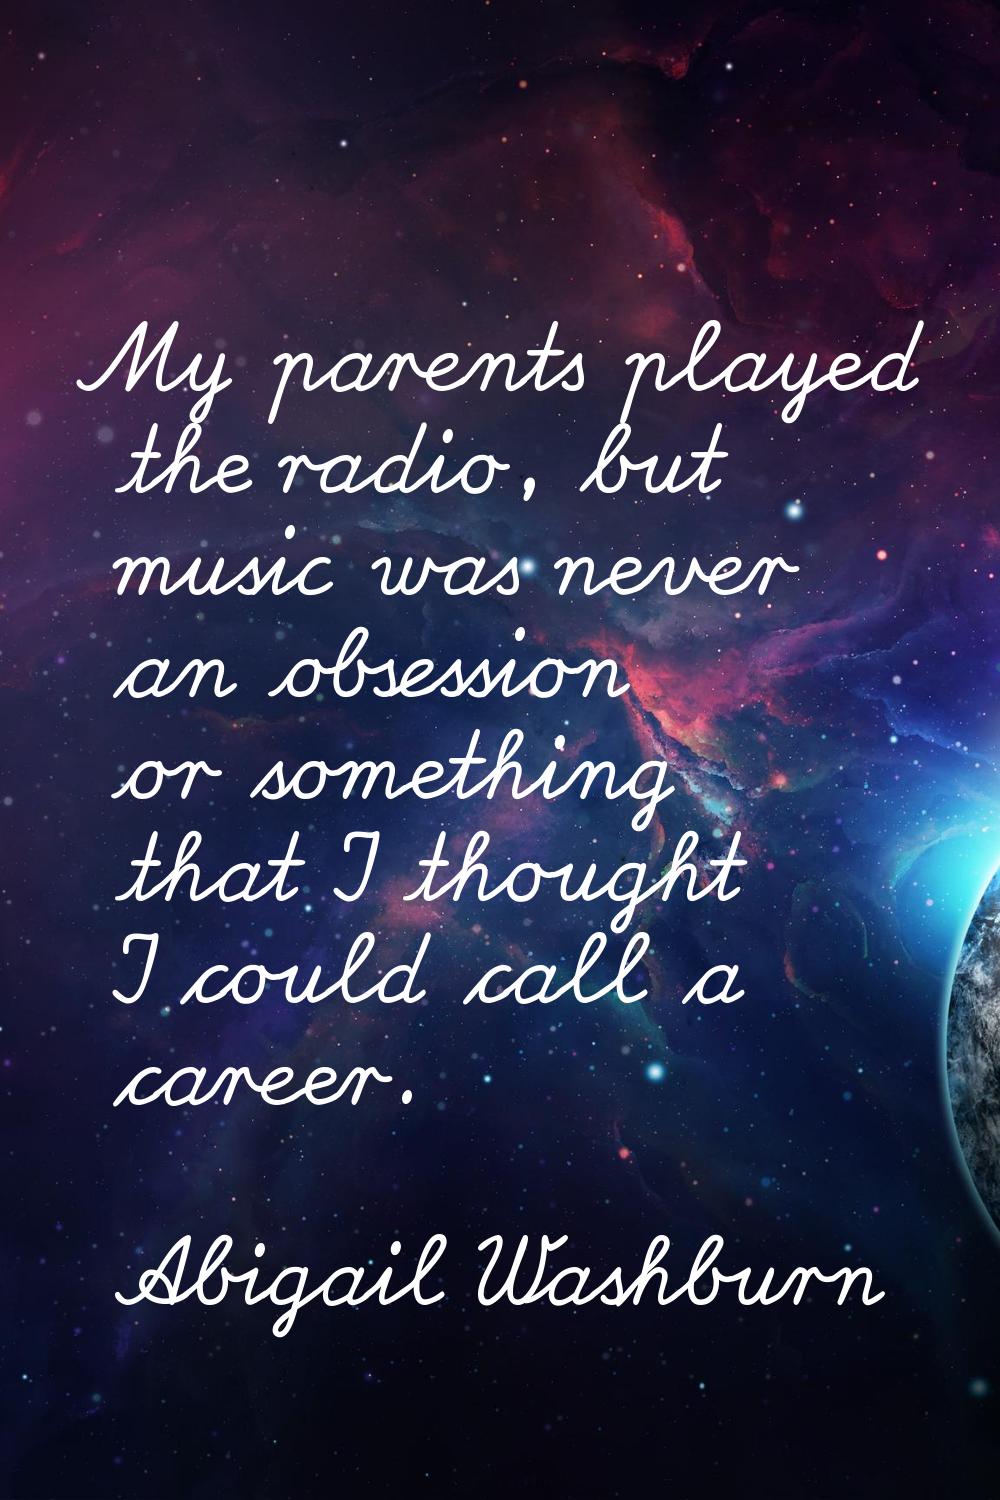 My parents played the radio, but music was never an obsession or something that I thought I could c